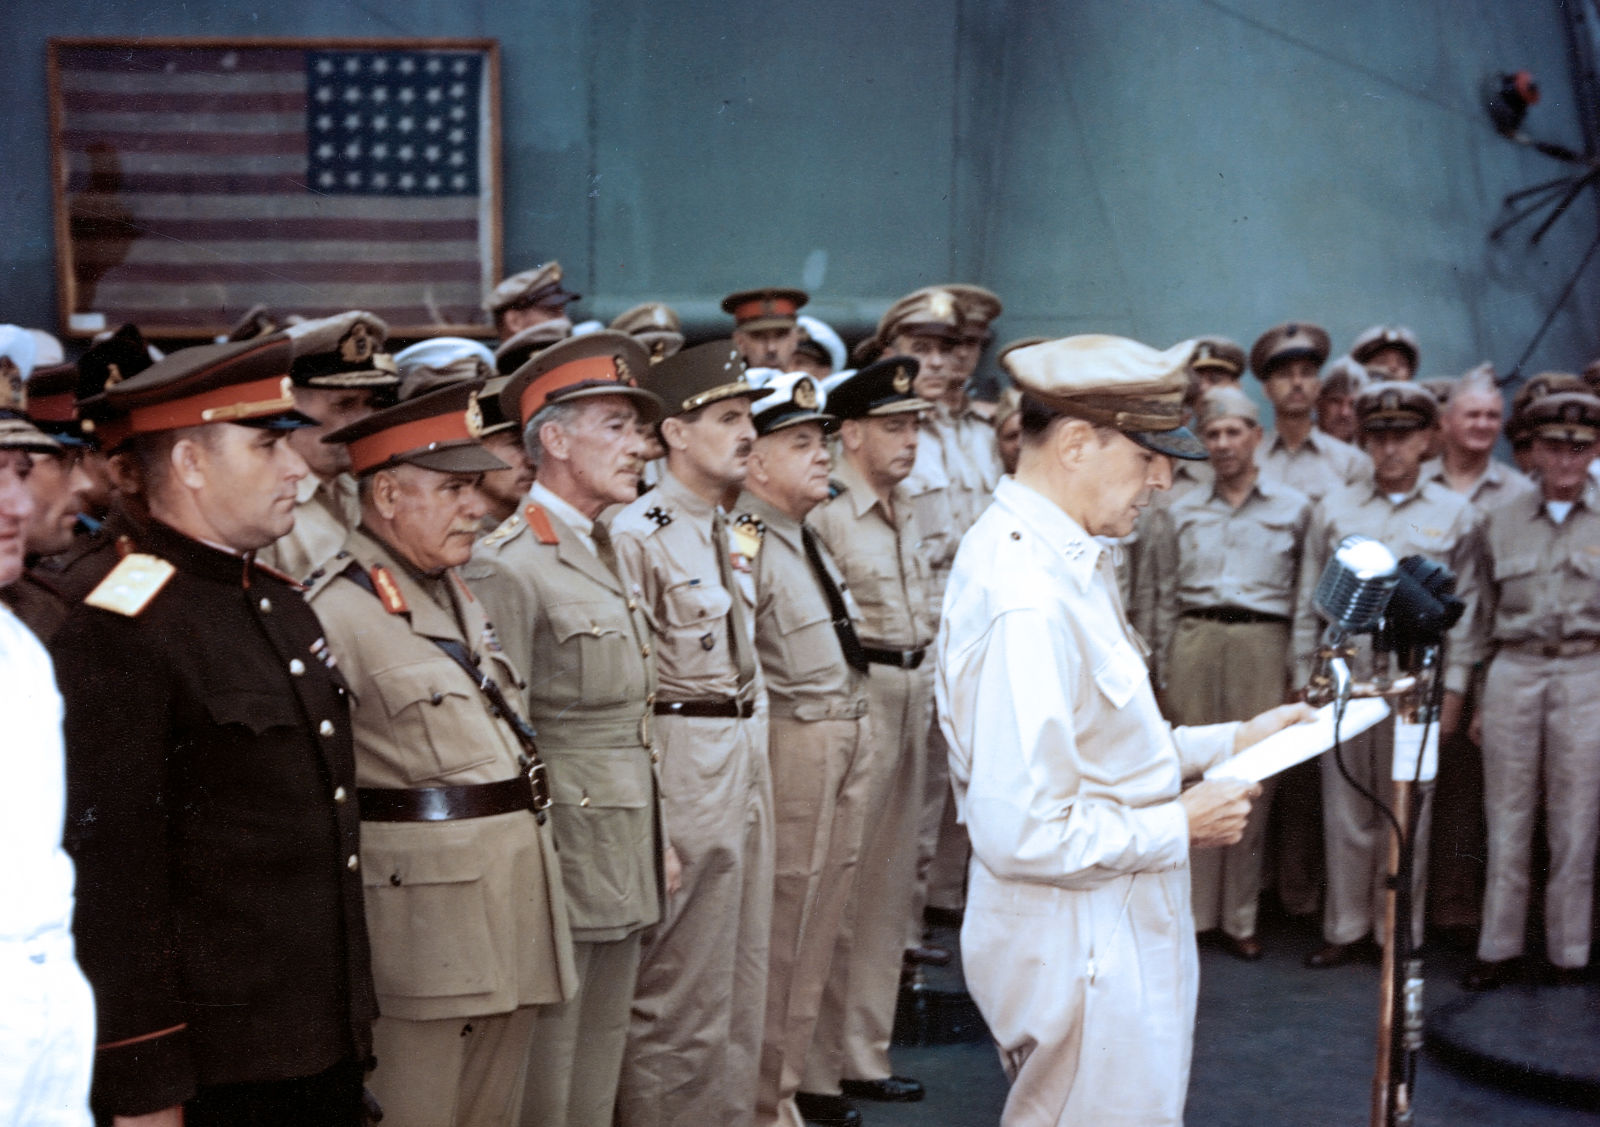 The Perry flag is visible in the background behind the assembled military dignitaries. General MacArthur is at the microphone. 